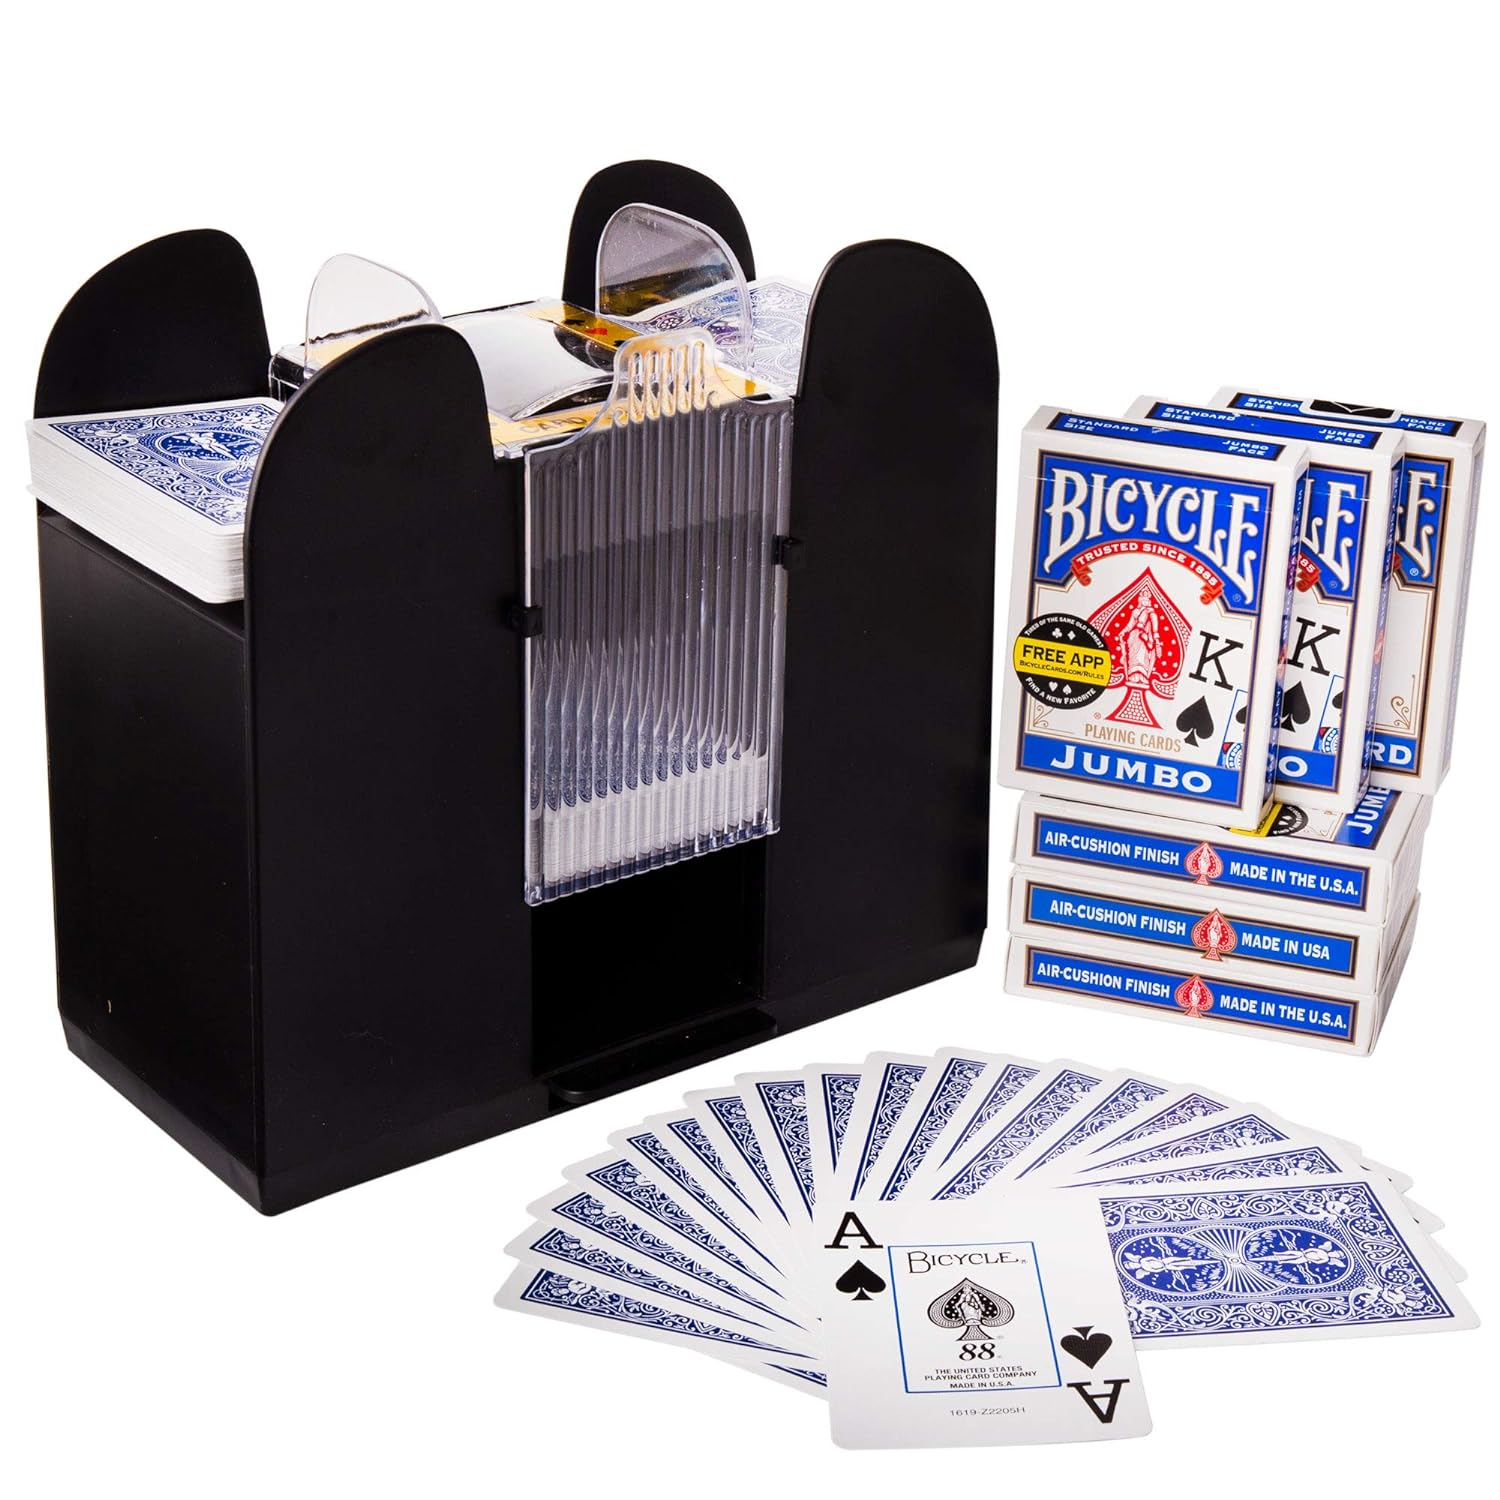 Brybelly 6-Deck Shuffler and 6 Jumbo Index Bicycle Decks - Battery-Operated Electric Shuffle Machine with Cards of Your Choice - Home & Casino Tournaments, Classic Poker, & Trading Card Games (Blue)